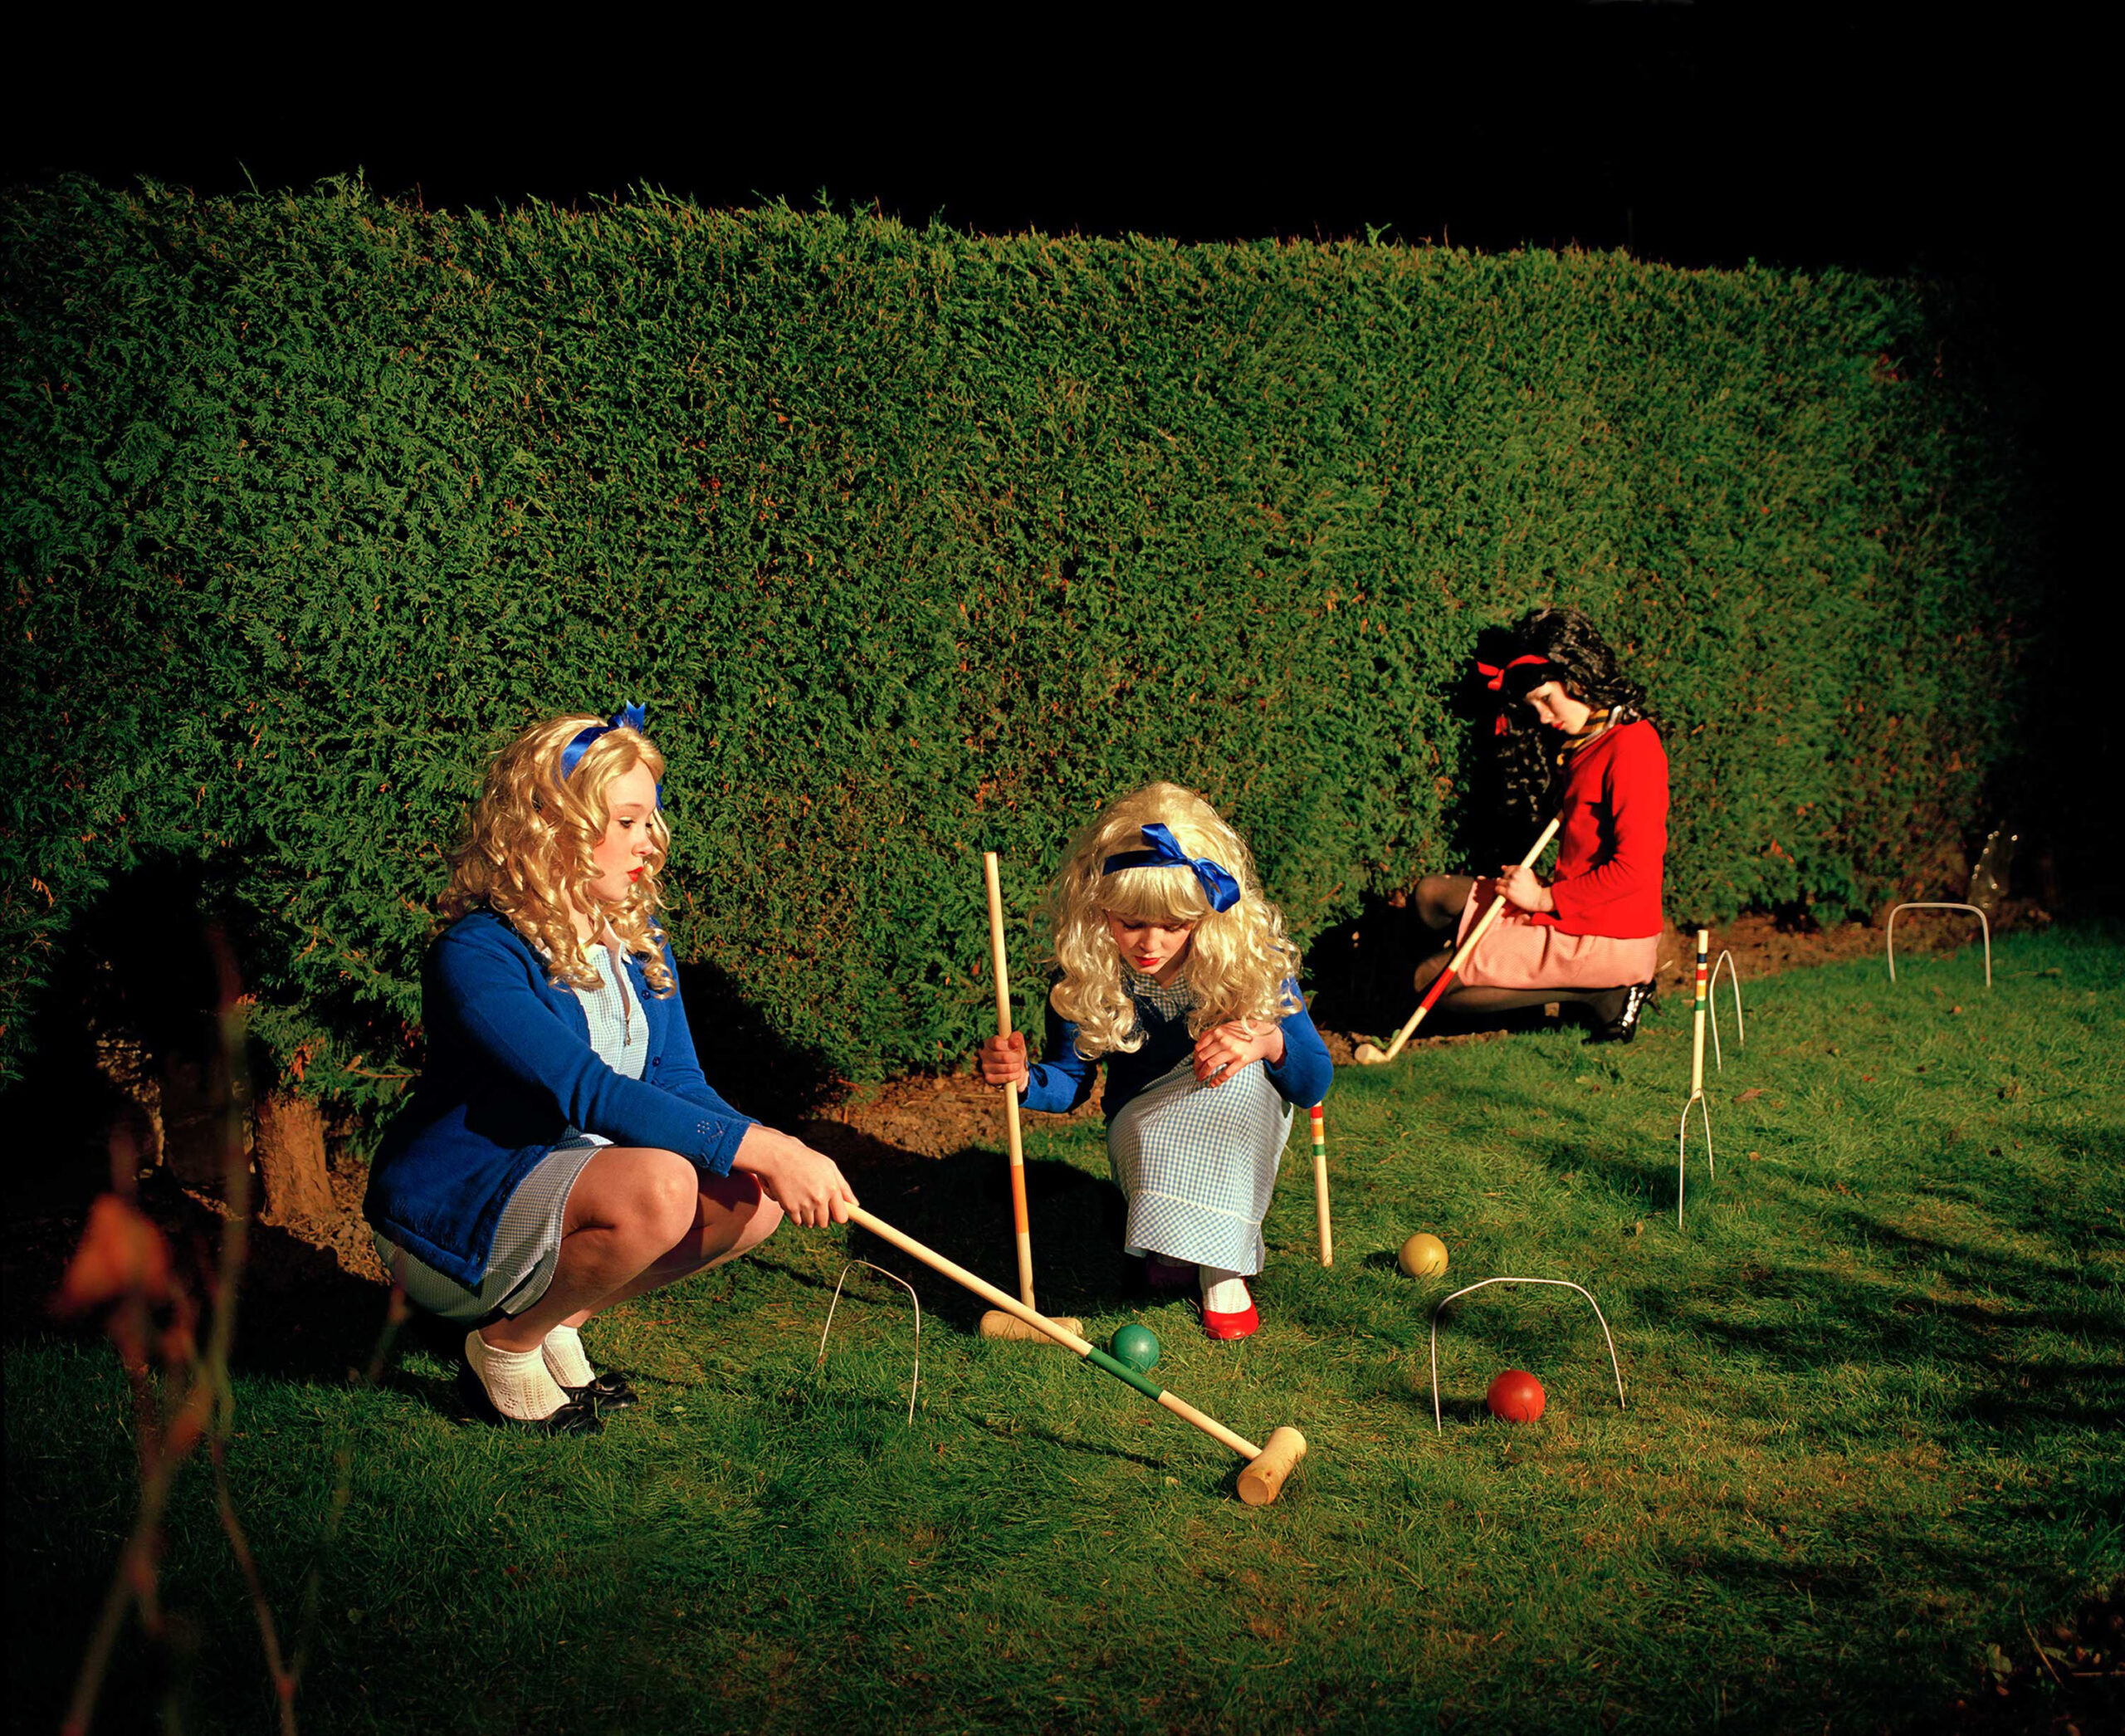 Rachel_louise_brown_web_resize_The-Croquet-Game